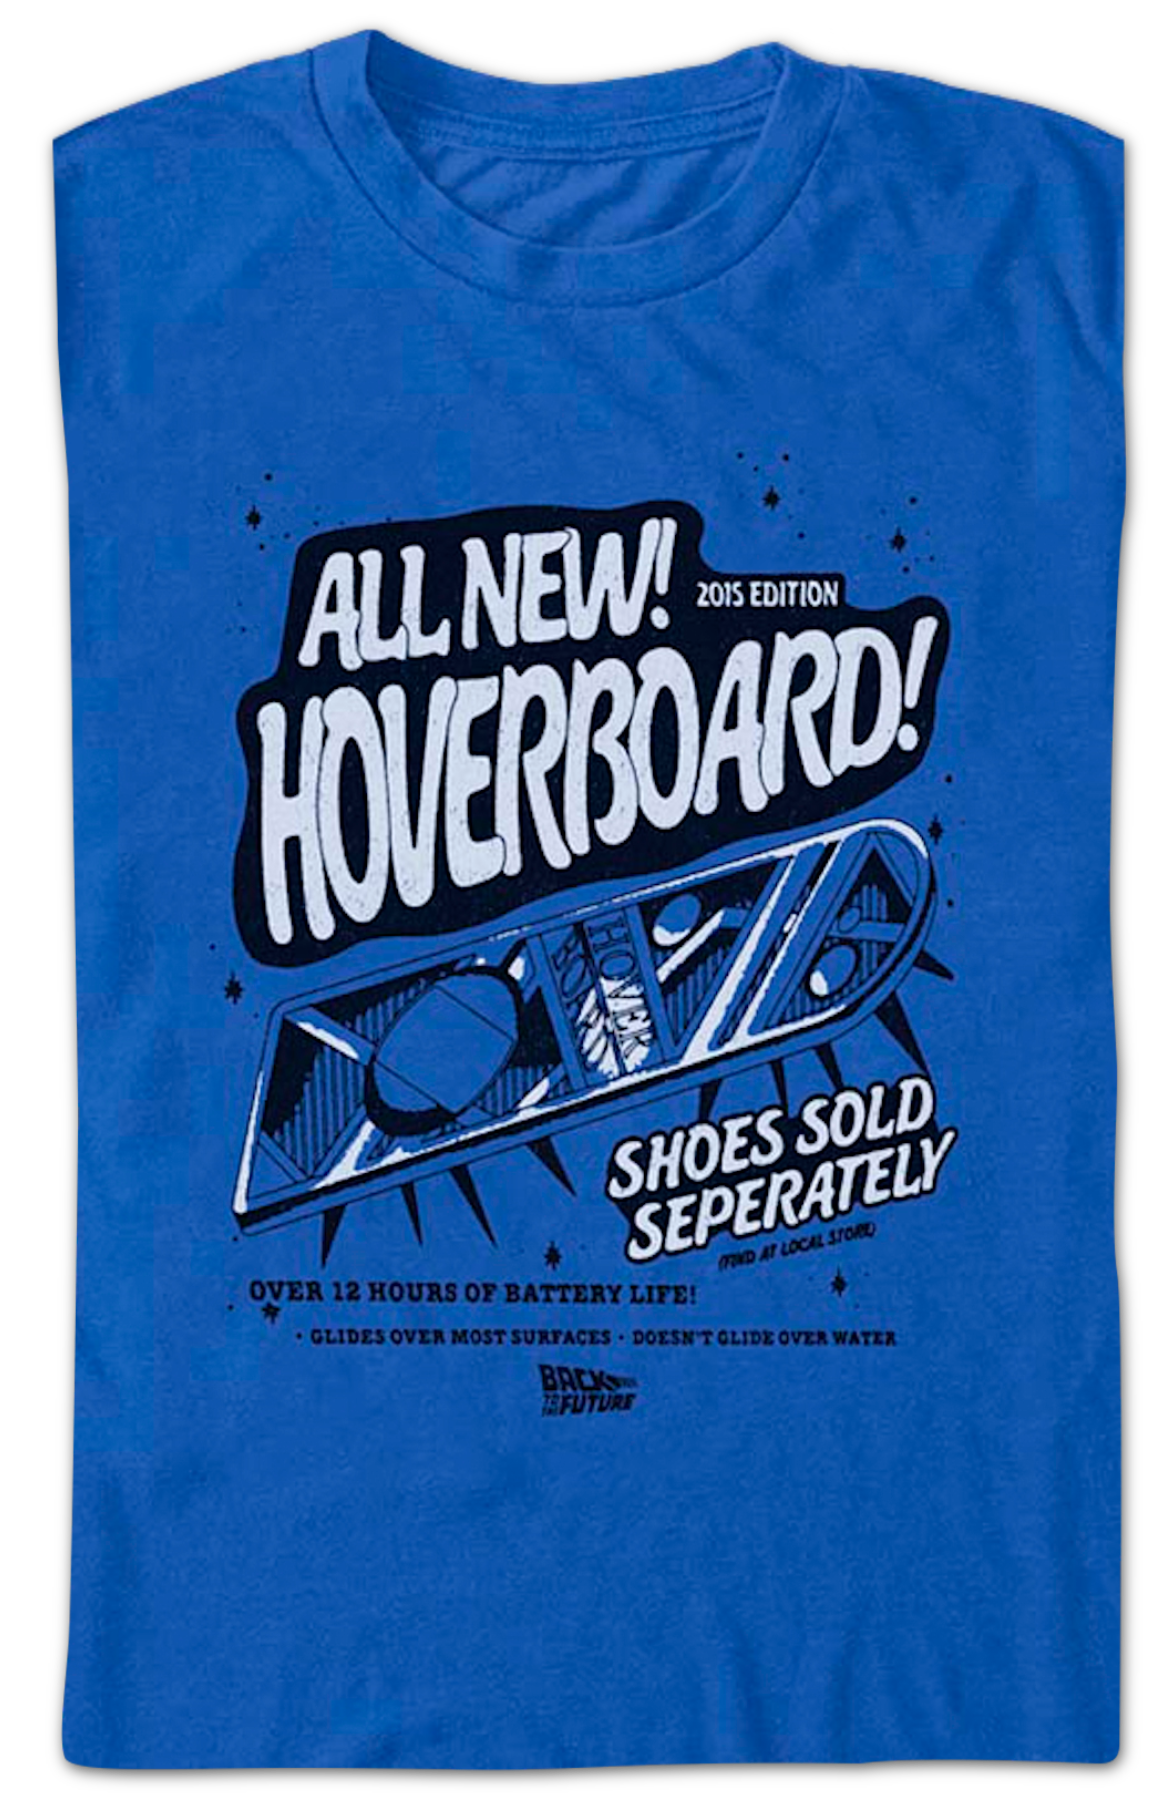 2015 Edition Hoverboard Back To The Future T-Shirt